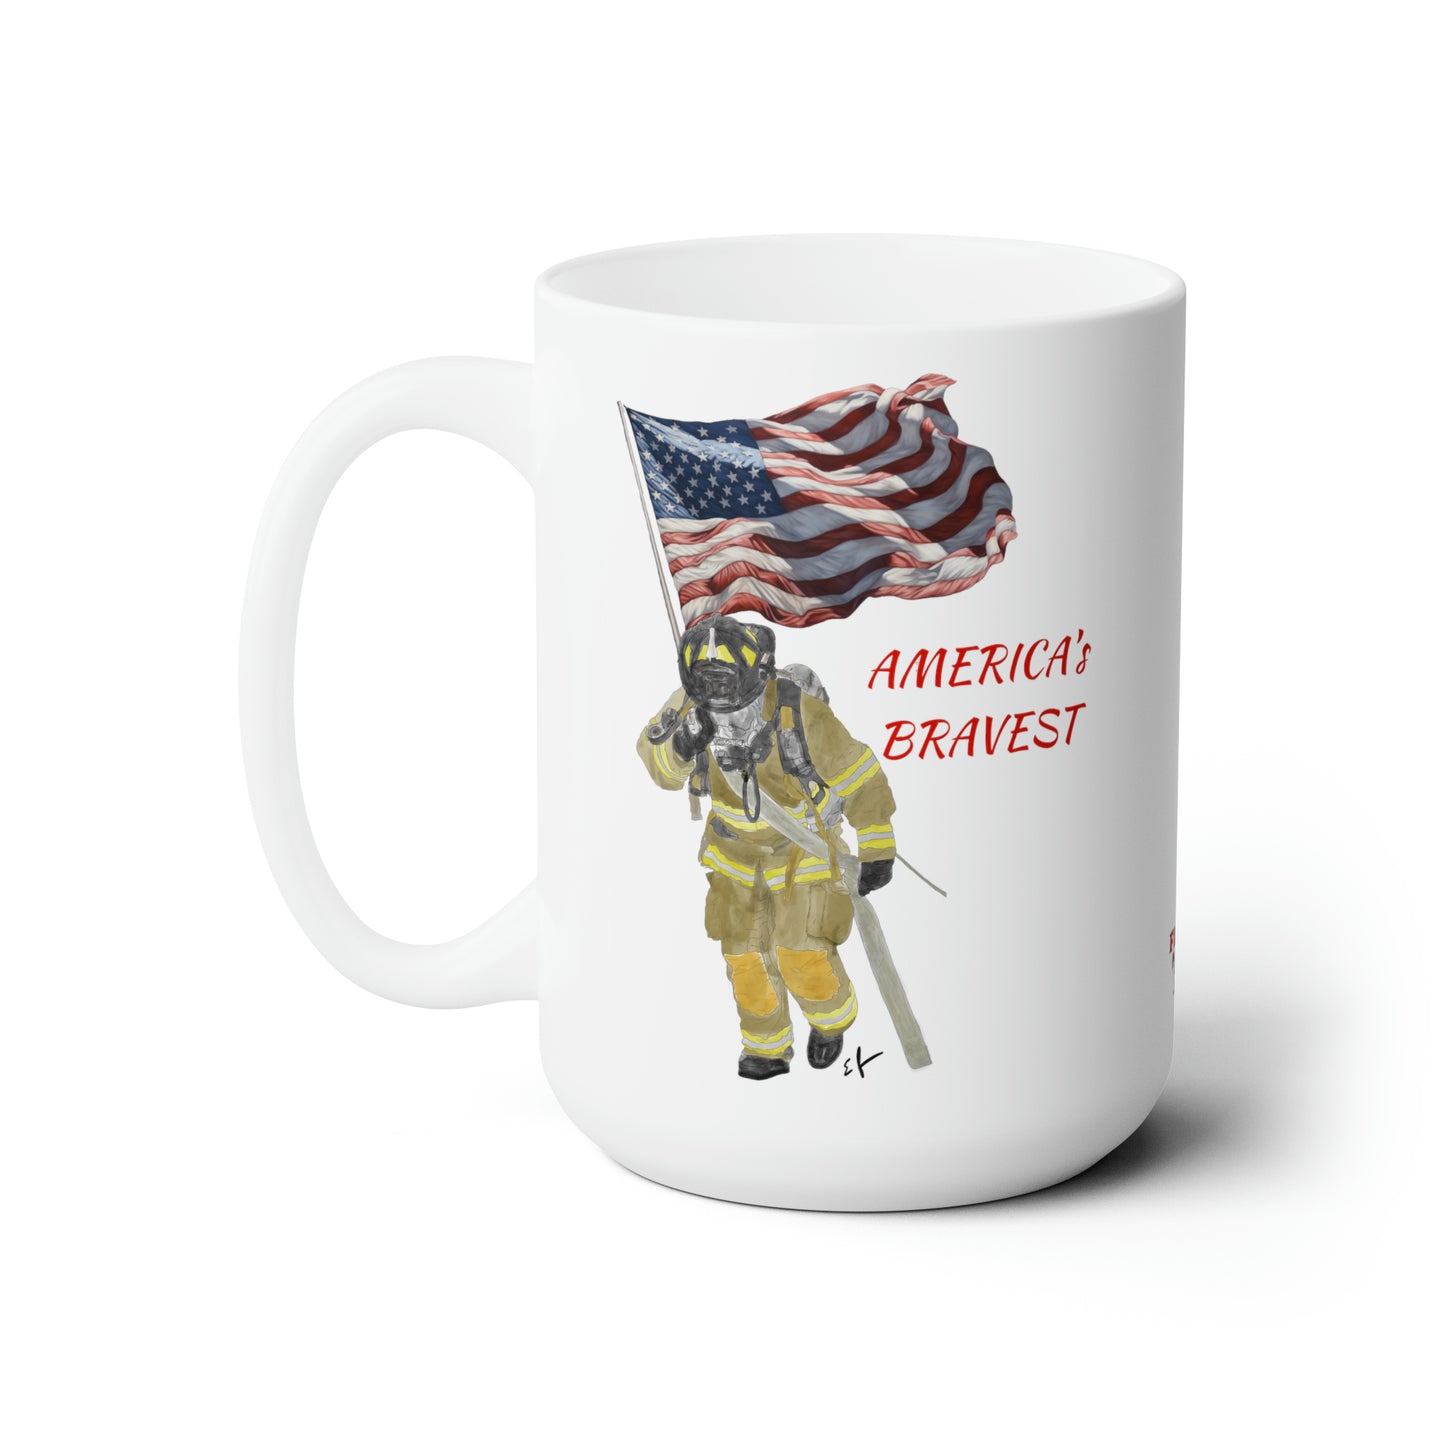 America's Bravest Ceramic Mug 15oz | American Firefighter 4th of July Patriotic Flag Waving Old Glory Fireman Fire Fighter Coffee Cup